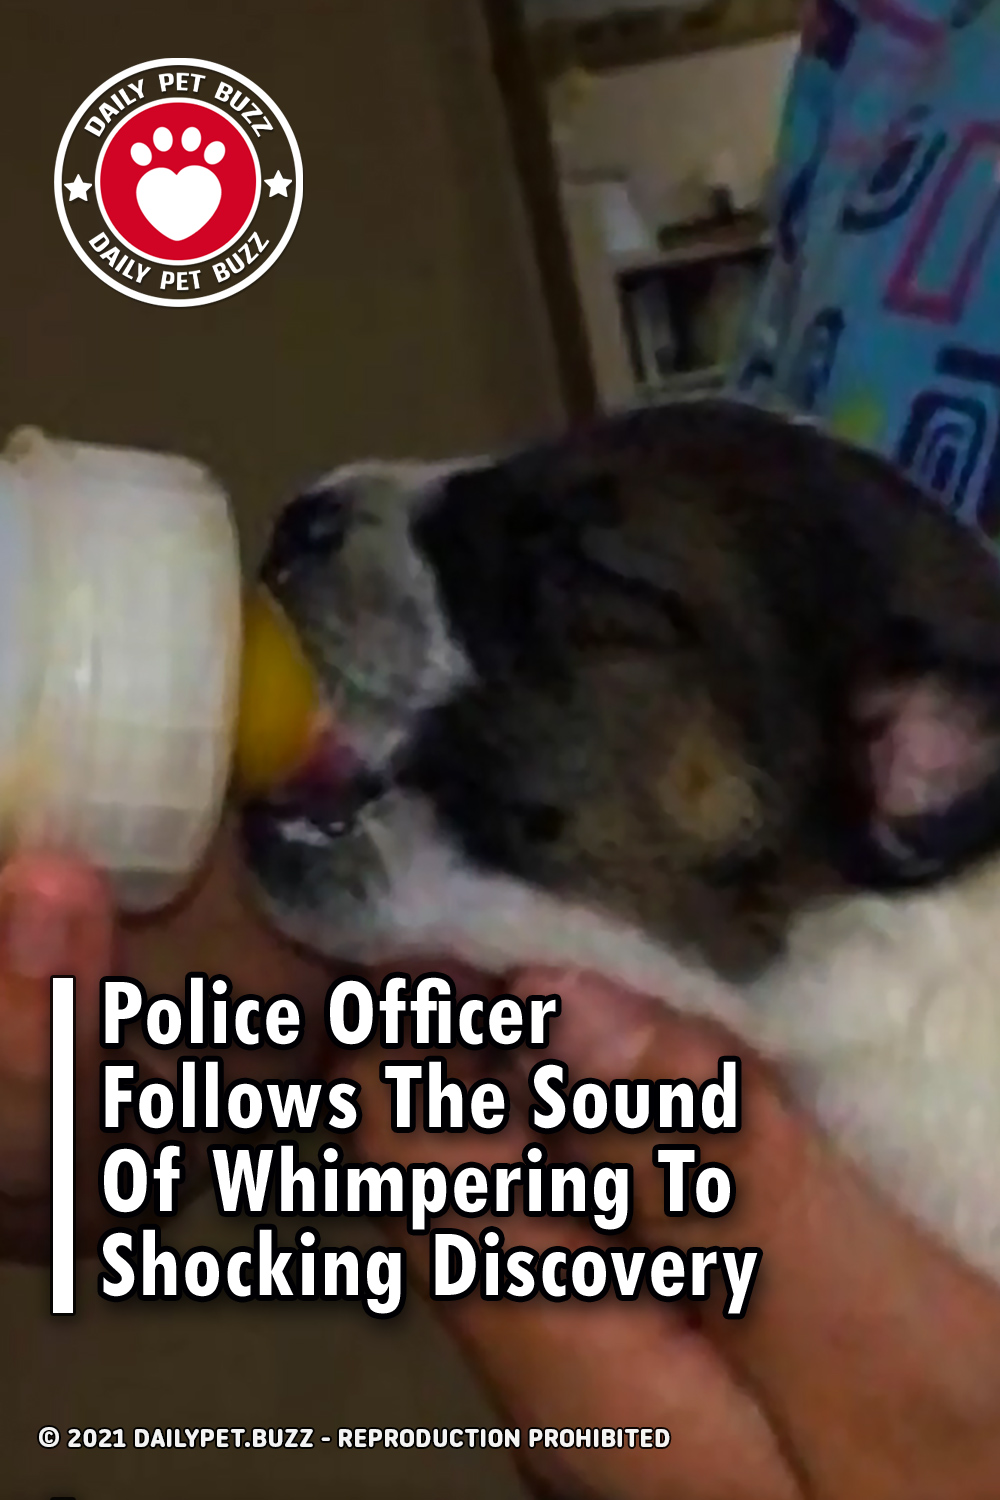 Police Officer Follows The Sound Of Whimpering To Shocking Discovery